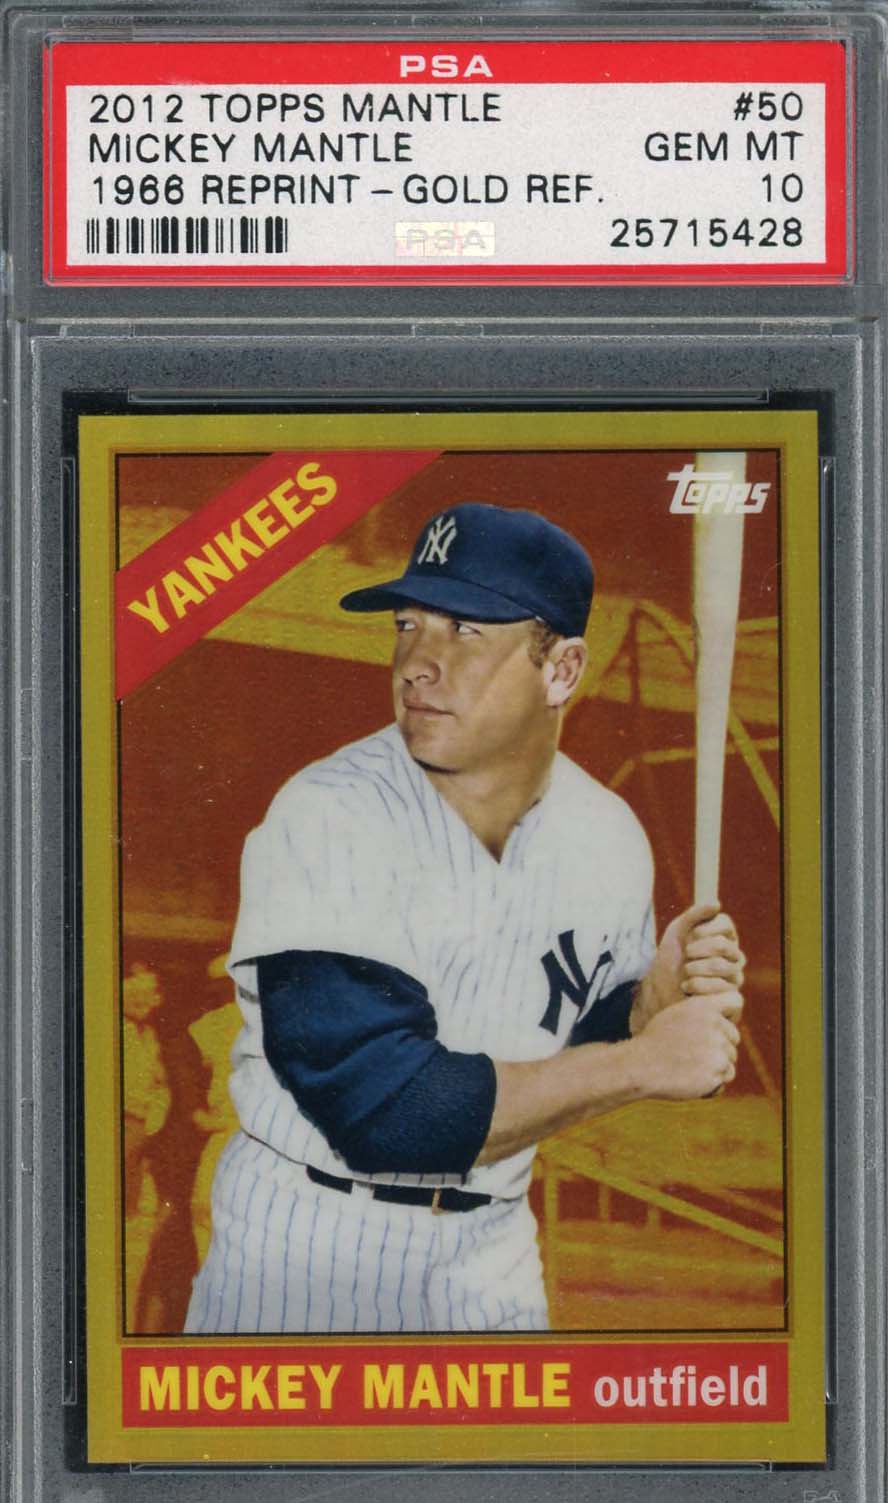 Mickey Mantle 2008 Topps Series Mint Card #7